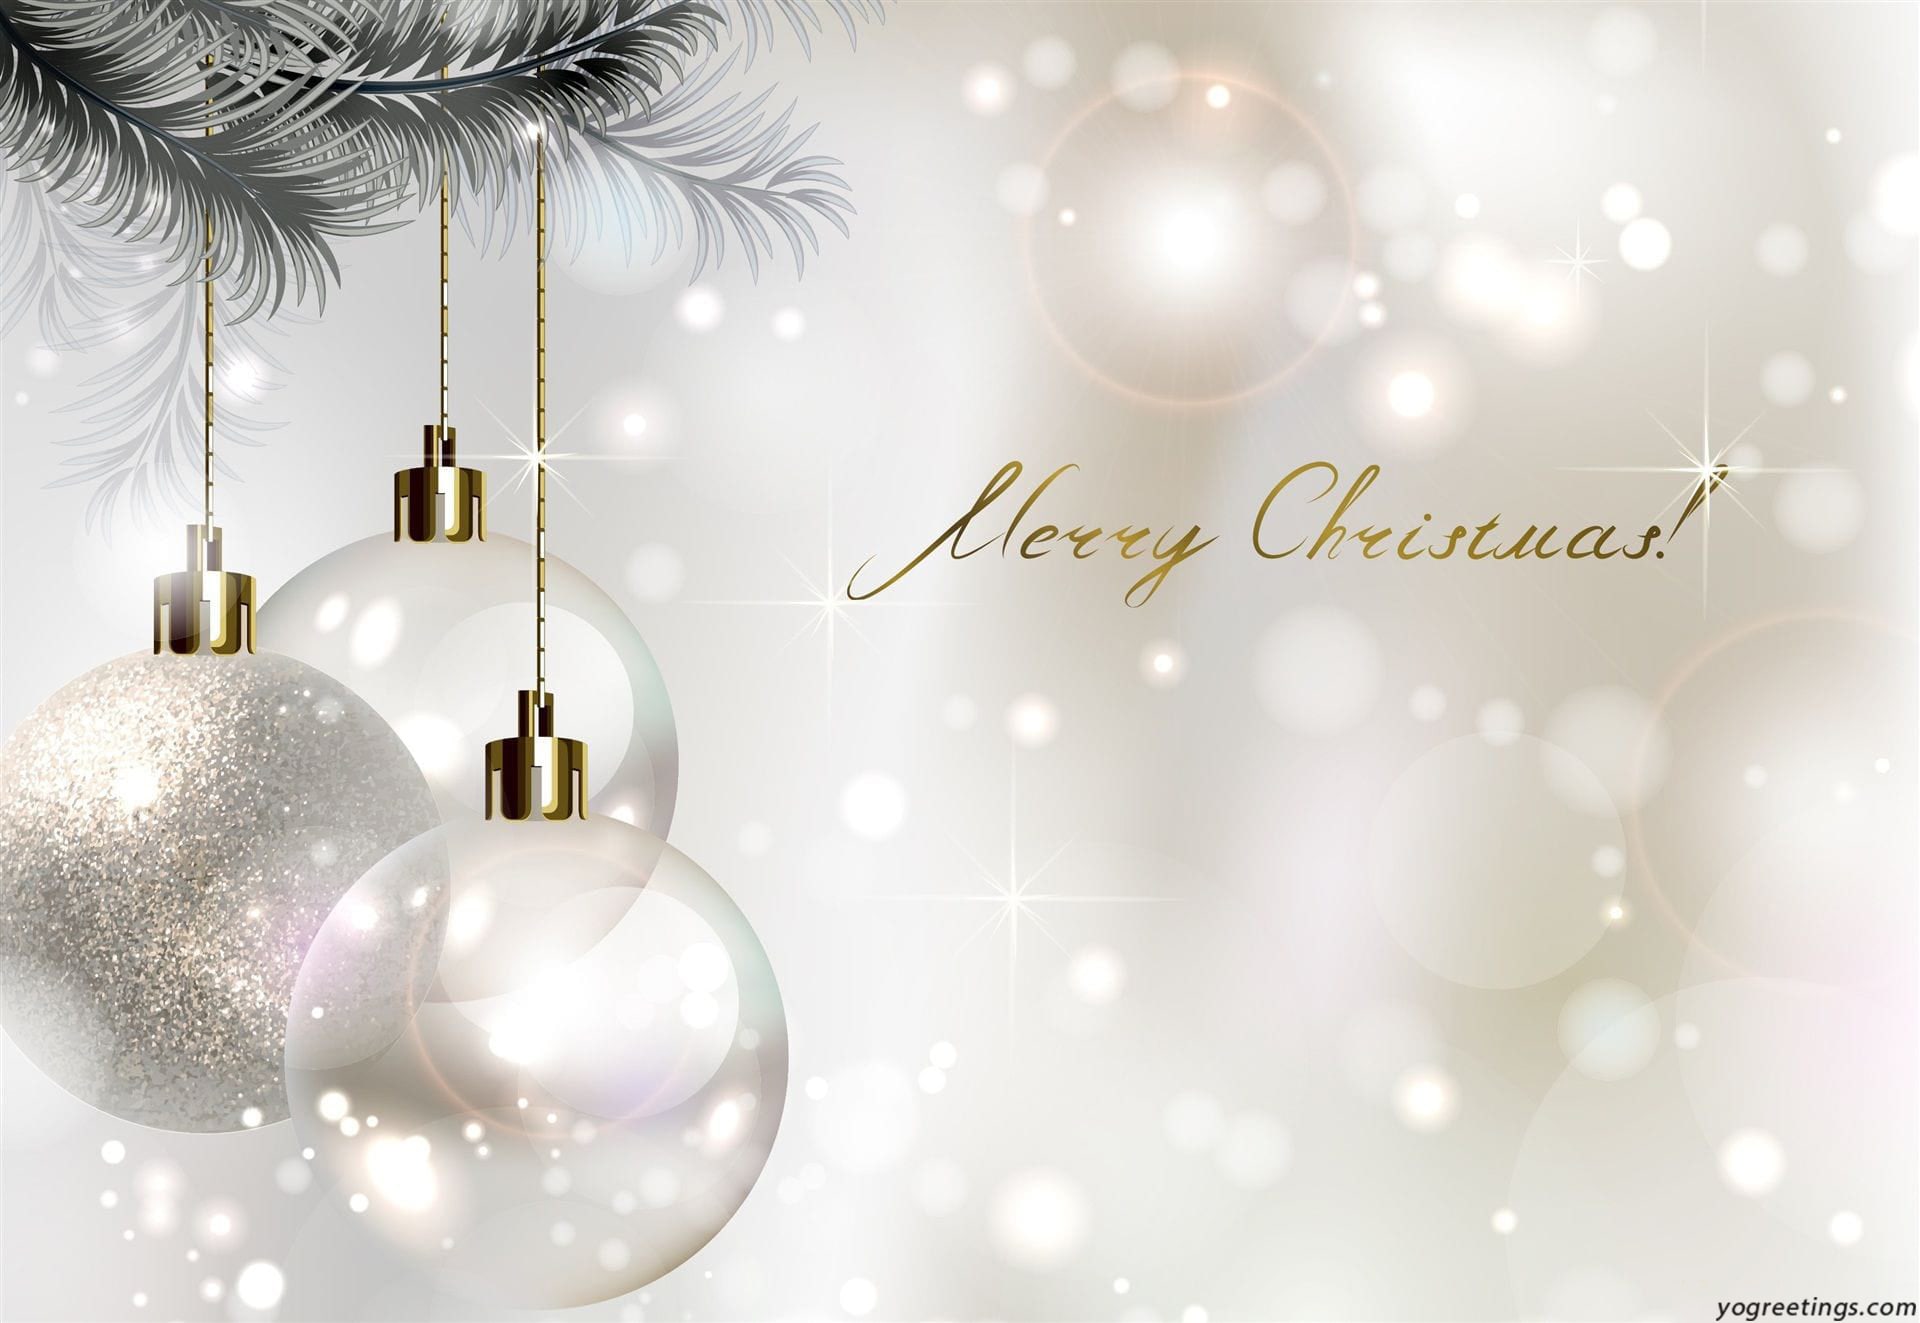 Merry Christmas Wallpaper Full HD Free Download - Images 2